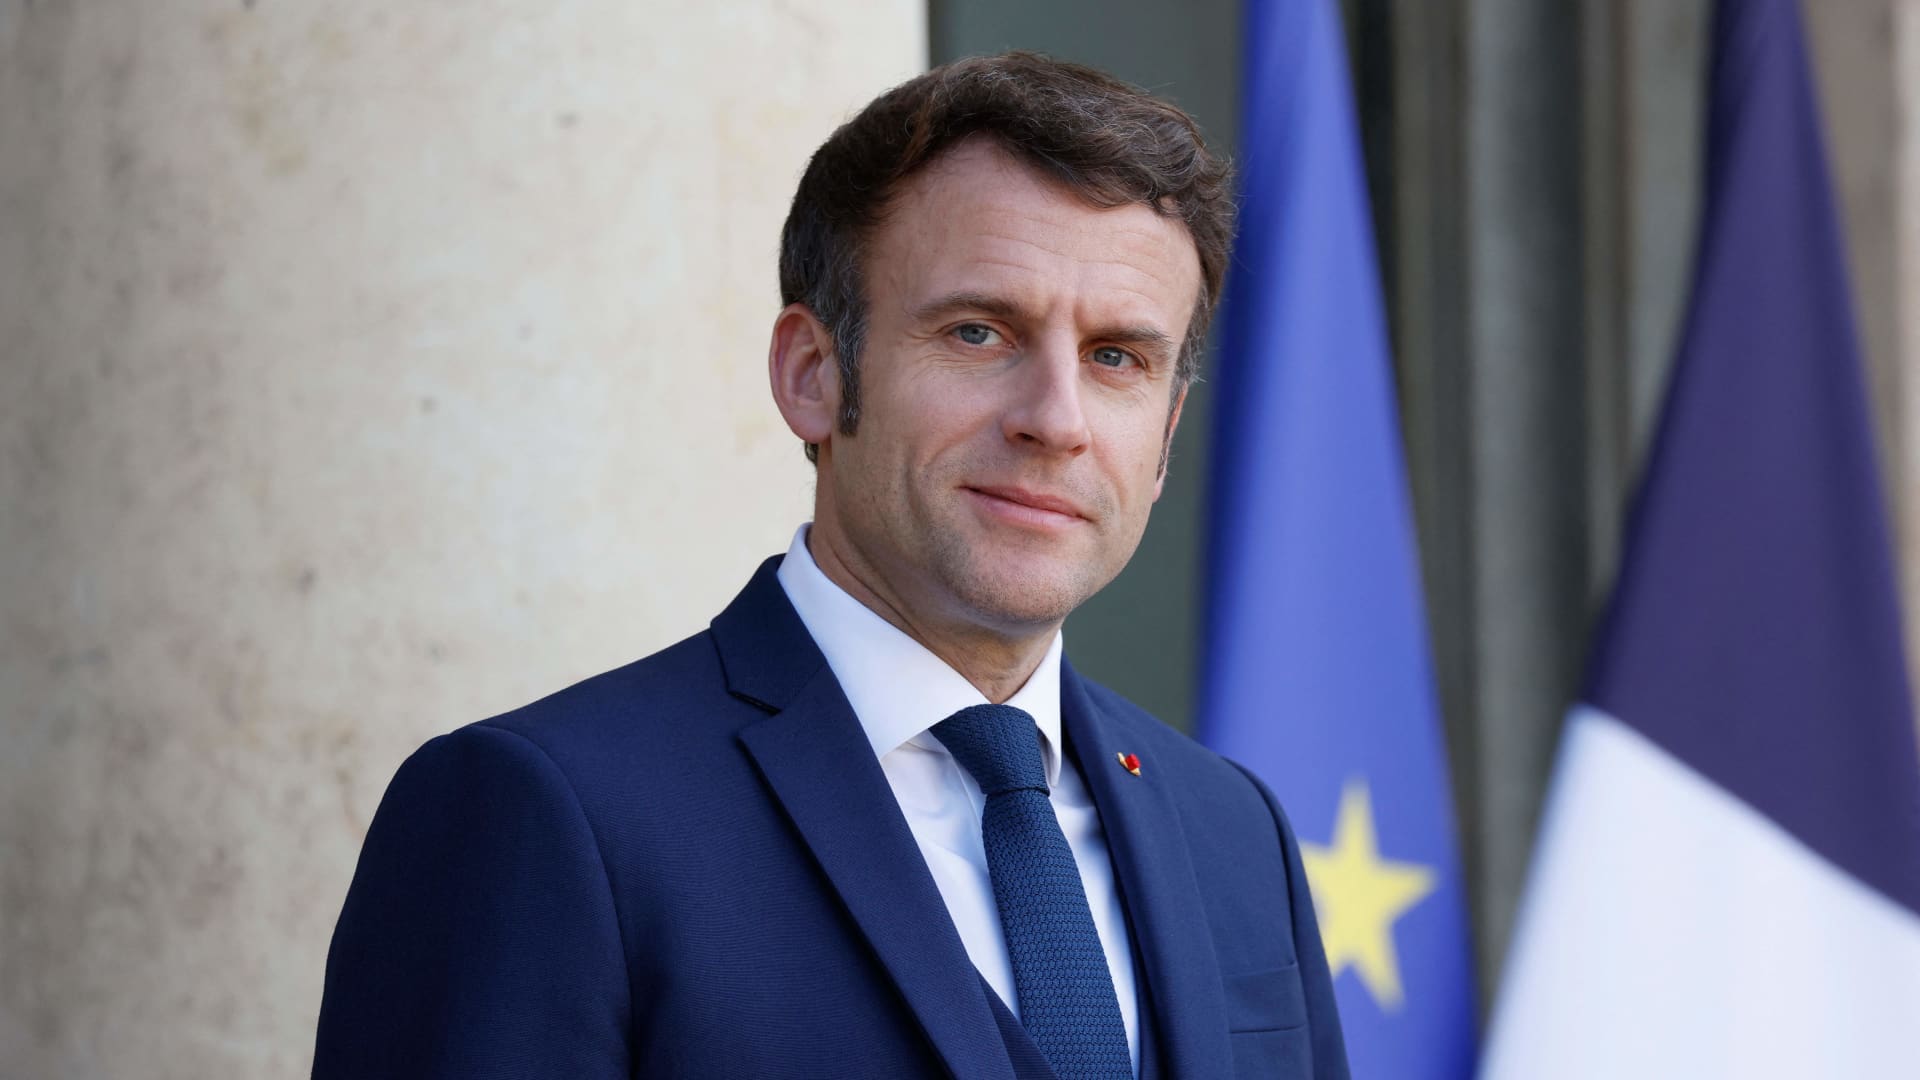 French President Emmanuel Macron looks on prior to greet Georgia's President at the Elysee Palace in Paris on February 28, 2022.